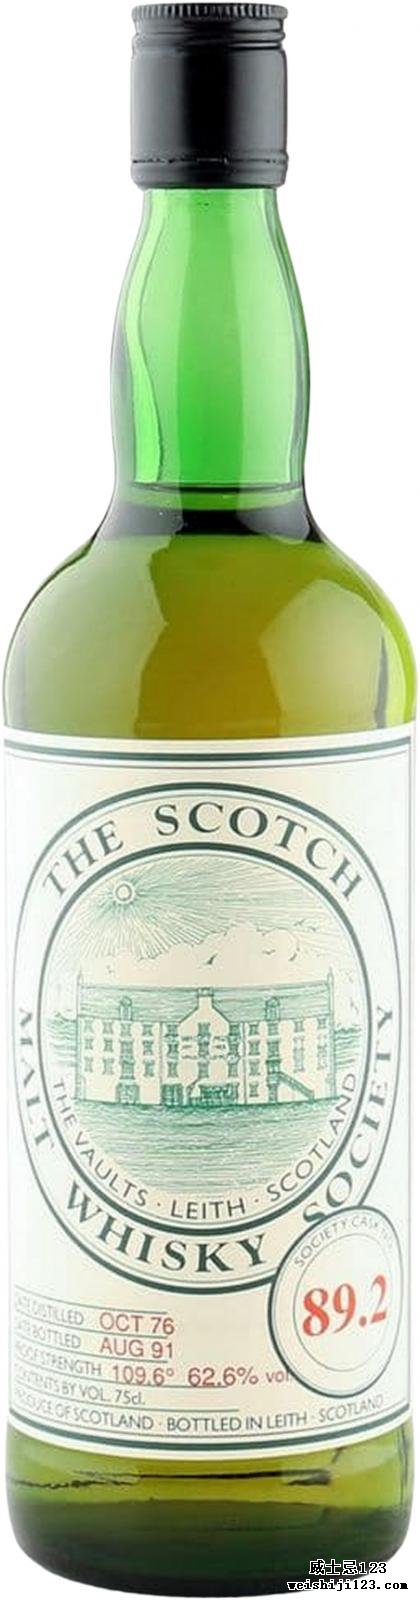 Tomintoul 1976 SMWS 89.2